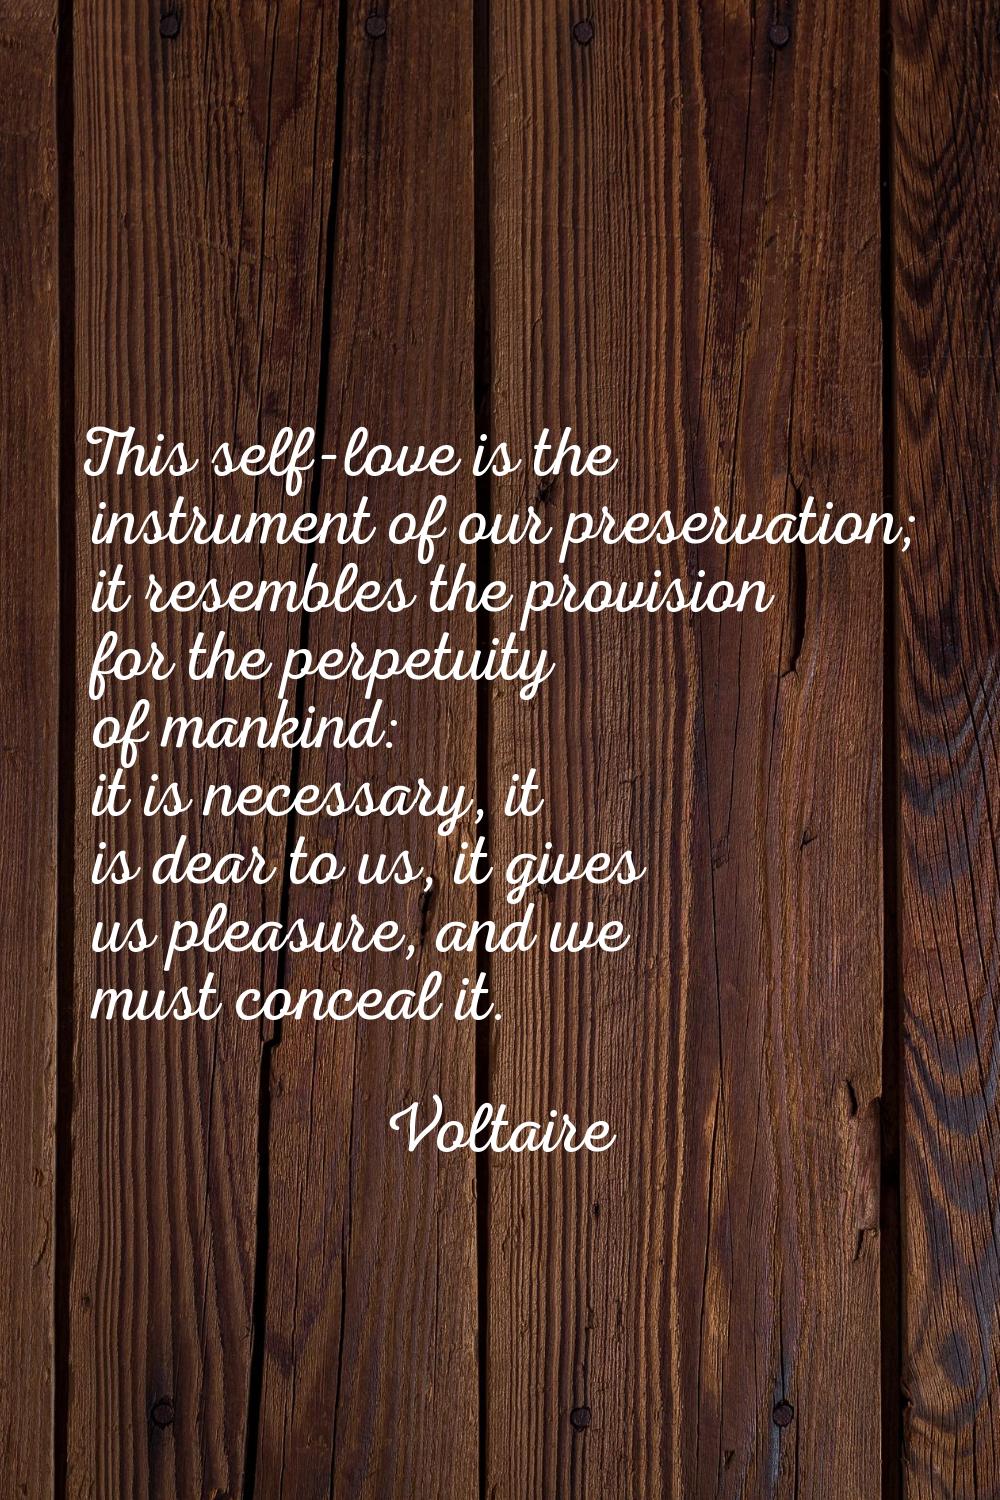 This self-love is the instrument of our preservation; it resembles the provision for the perpetuity